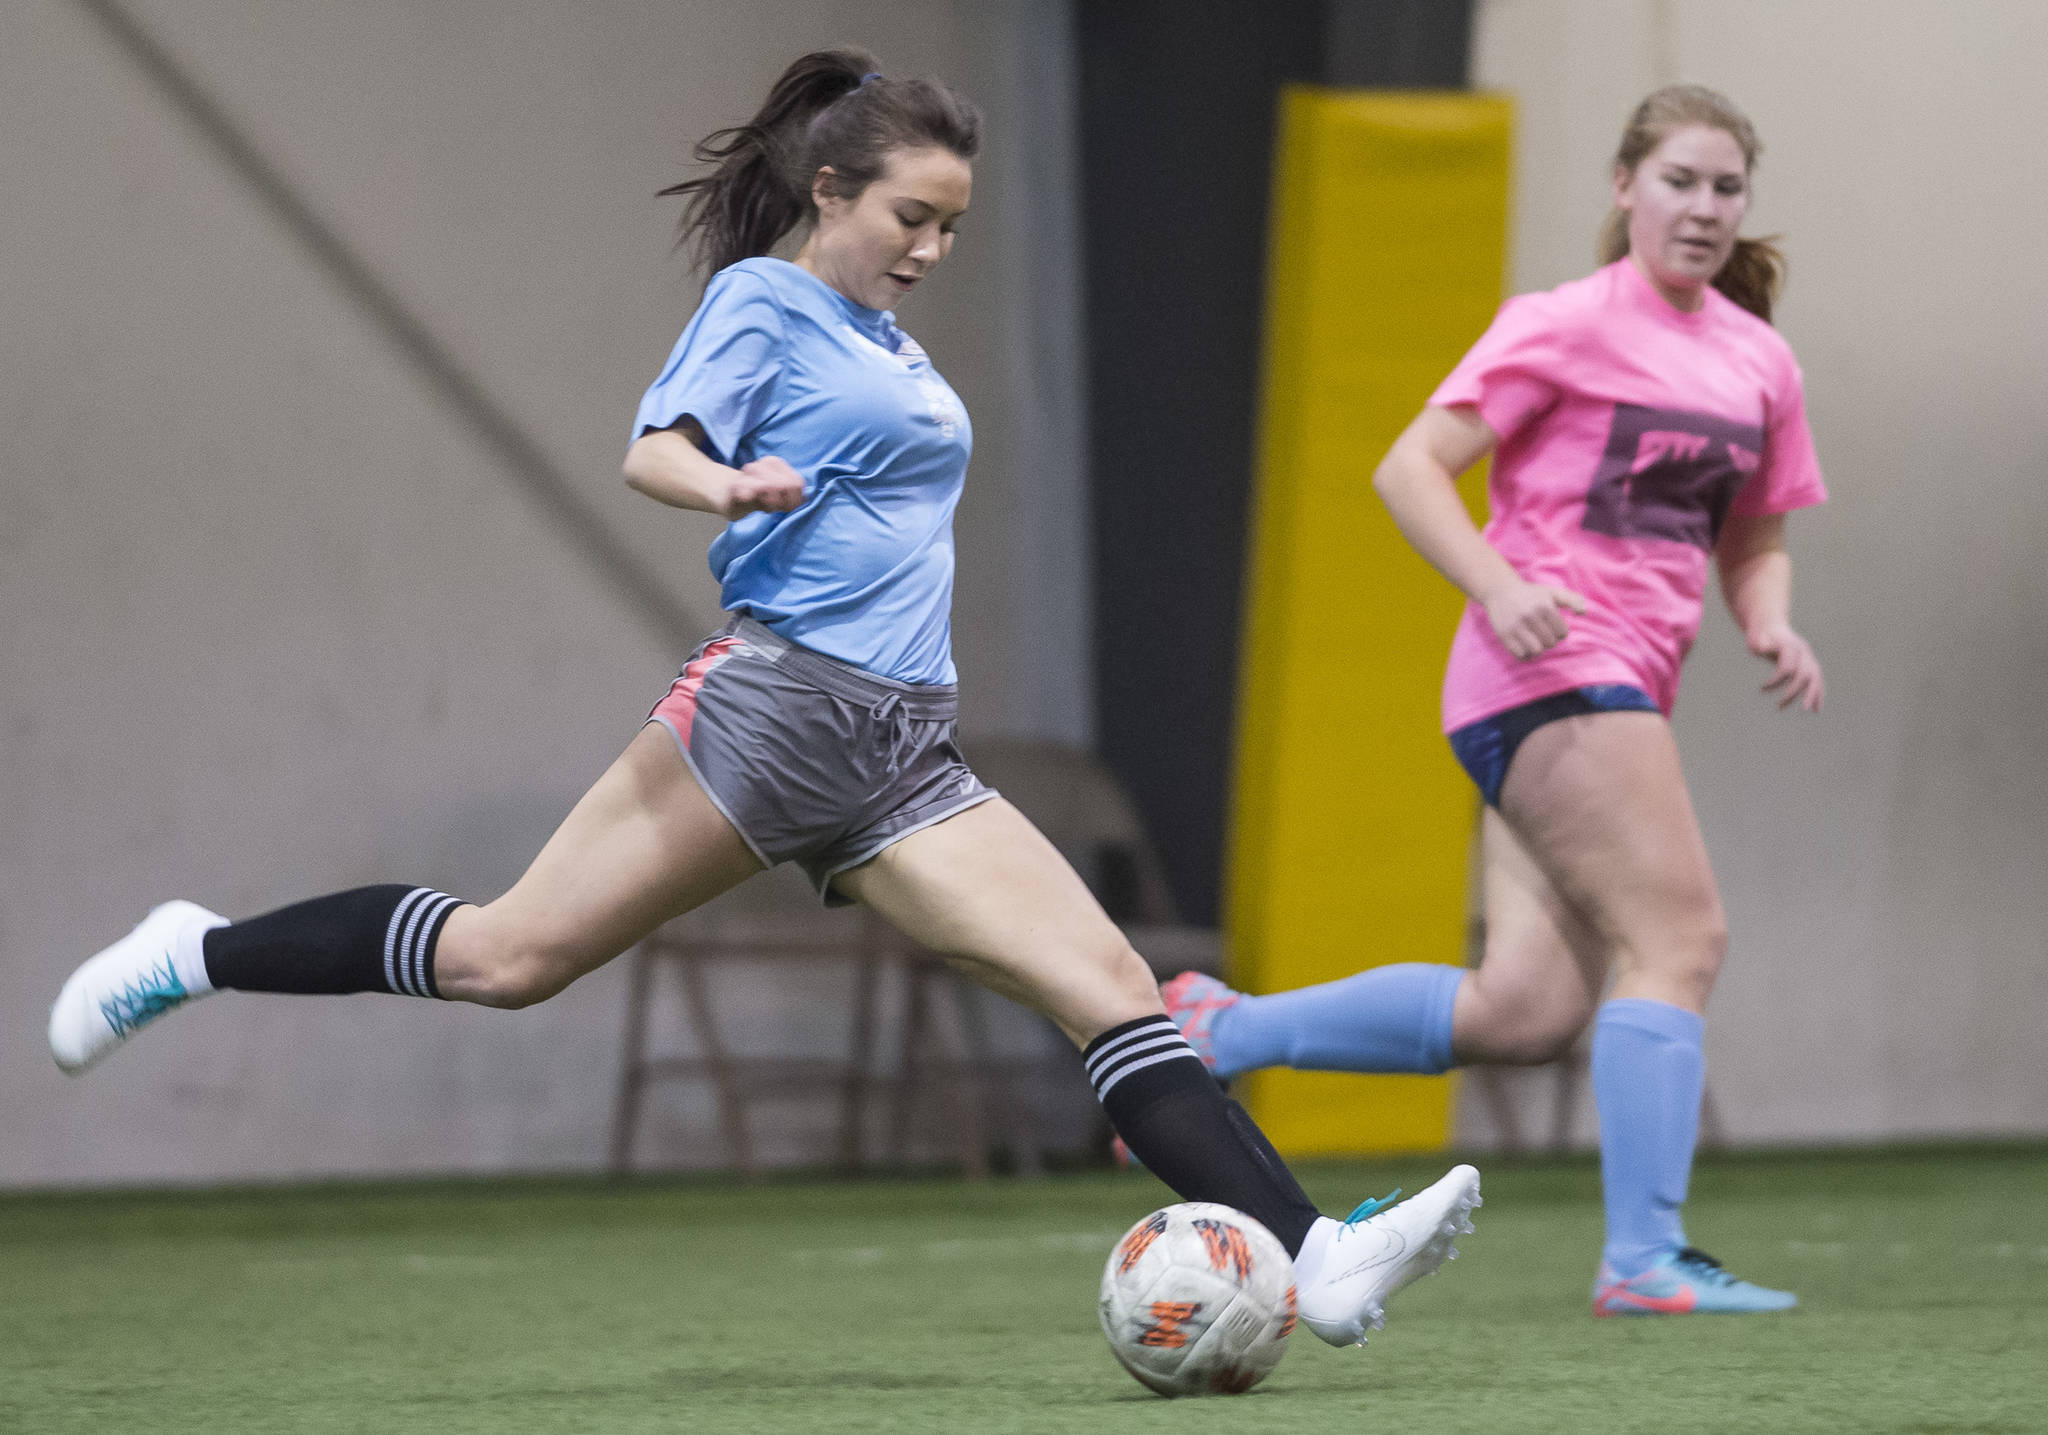 Iced Out plays against Pit Vipers at the annual Holiday Cup Soccer Tournament at the Wells Fargo Dimond Park Field House on Wednesday, Dec. 26, 2018. (Michael Penn | Juneau Empire)